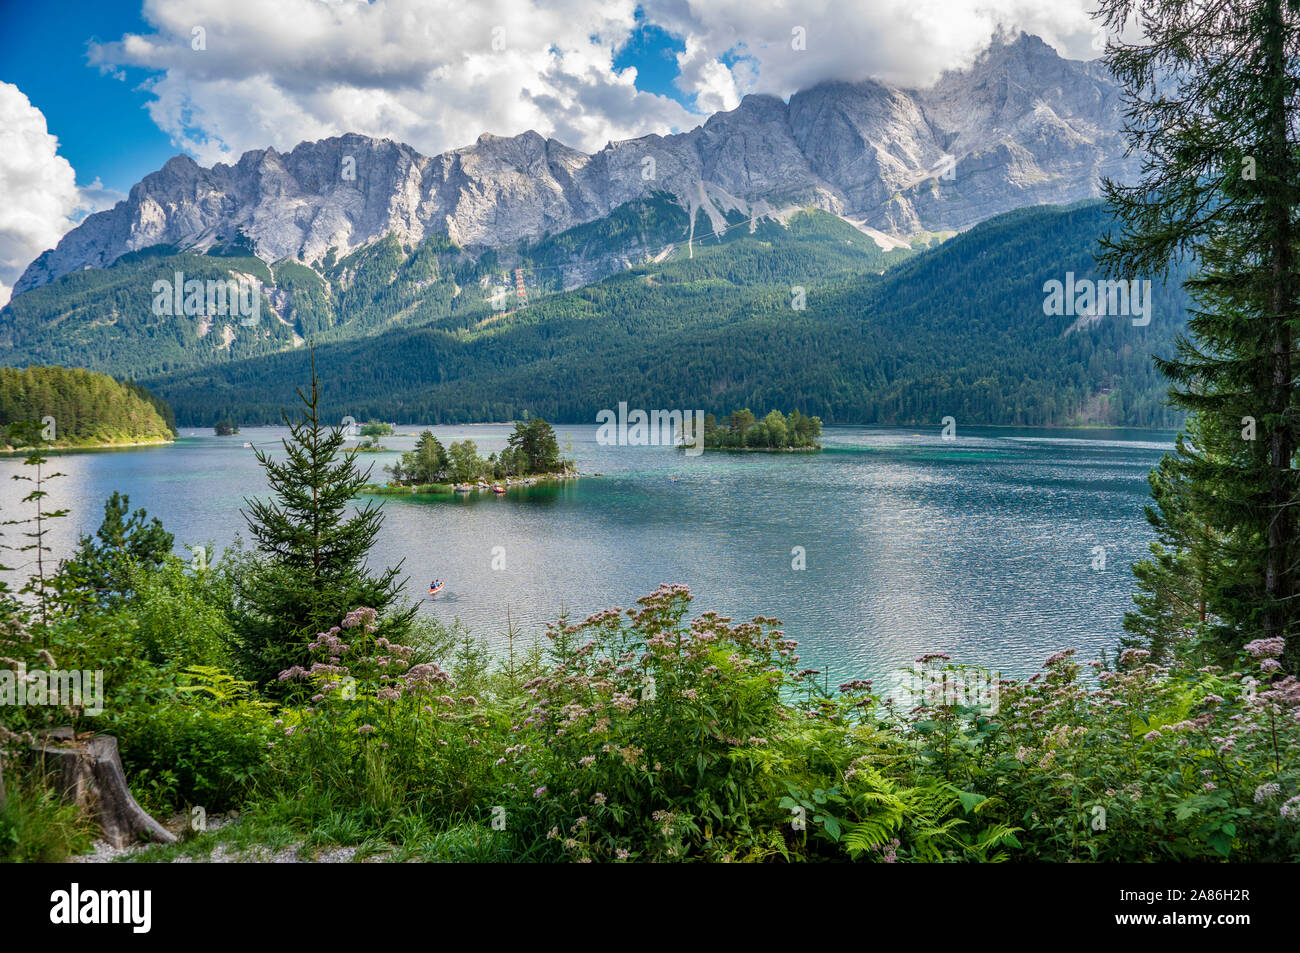 Colorful summer on the Eibsee lake in German Alps mountain. Germany, Europe. Stock Photo